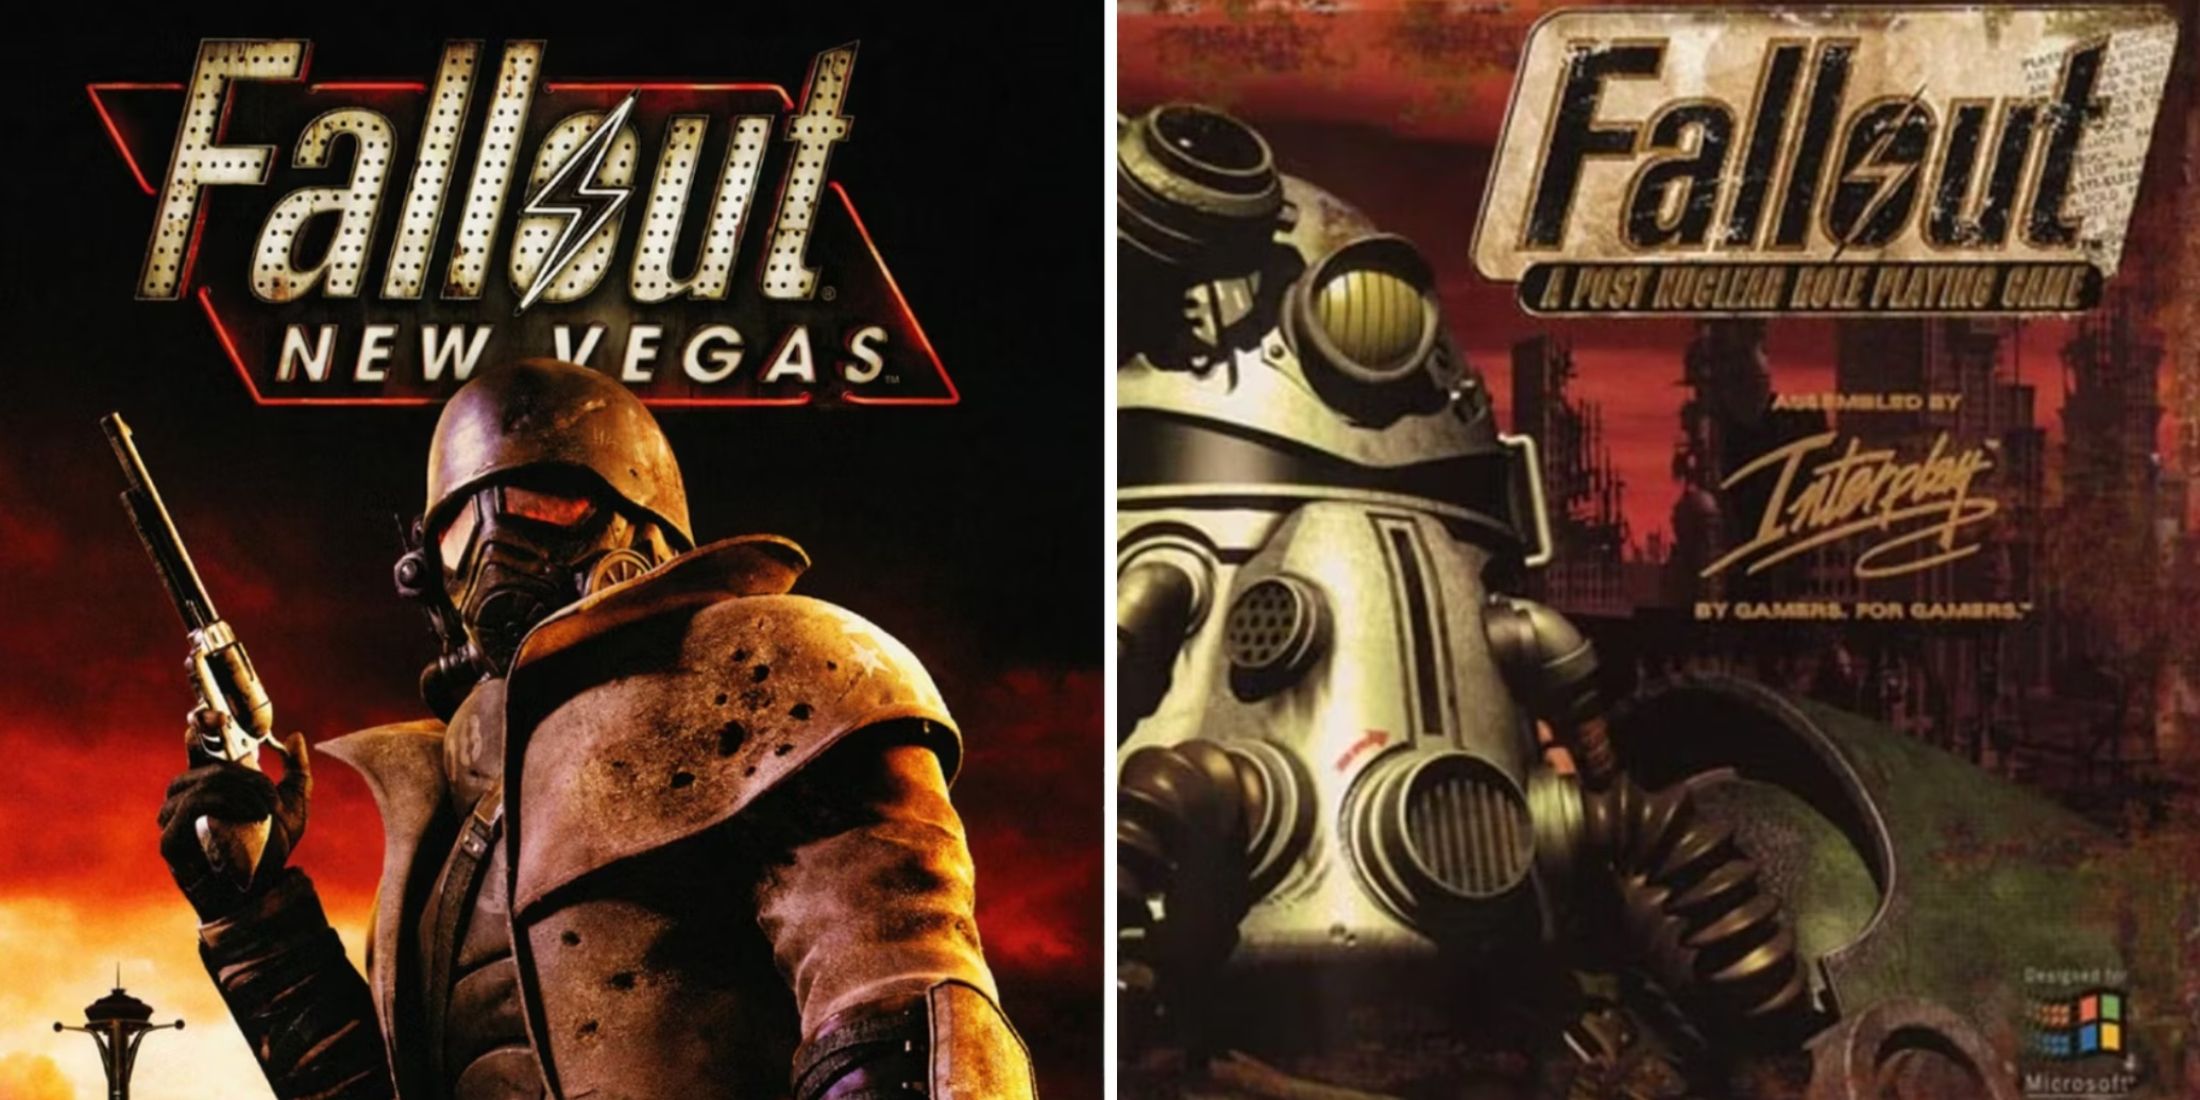 A split image of Fallout New Vegas and Fallout